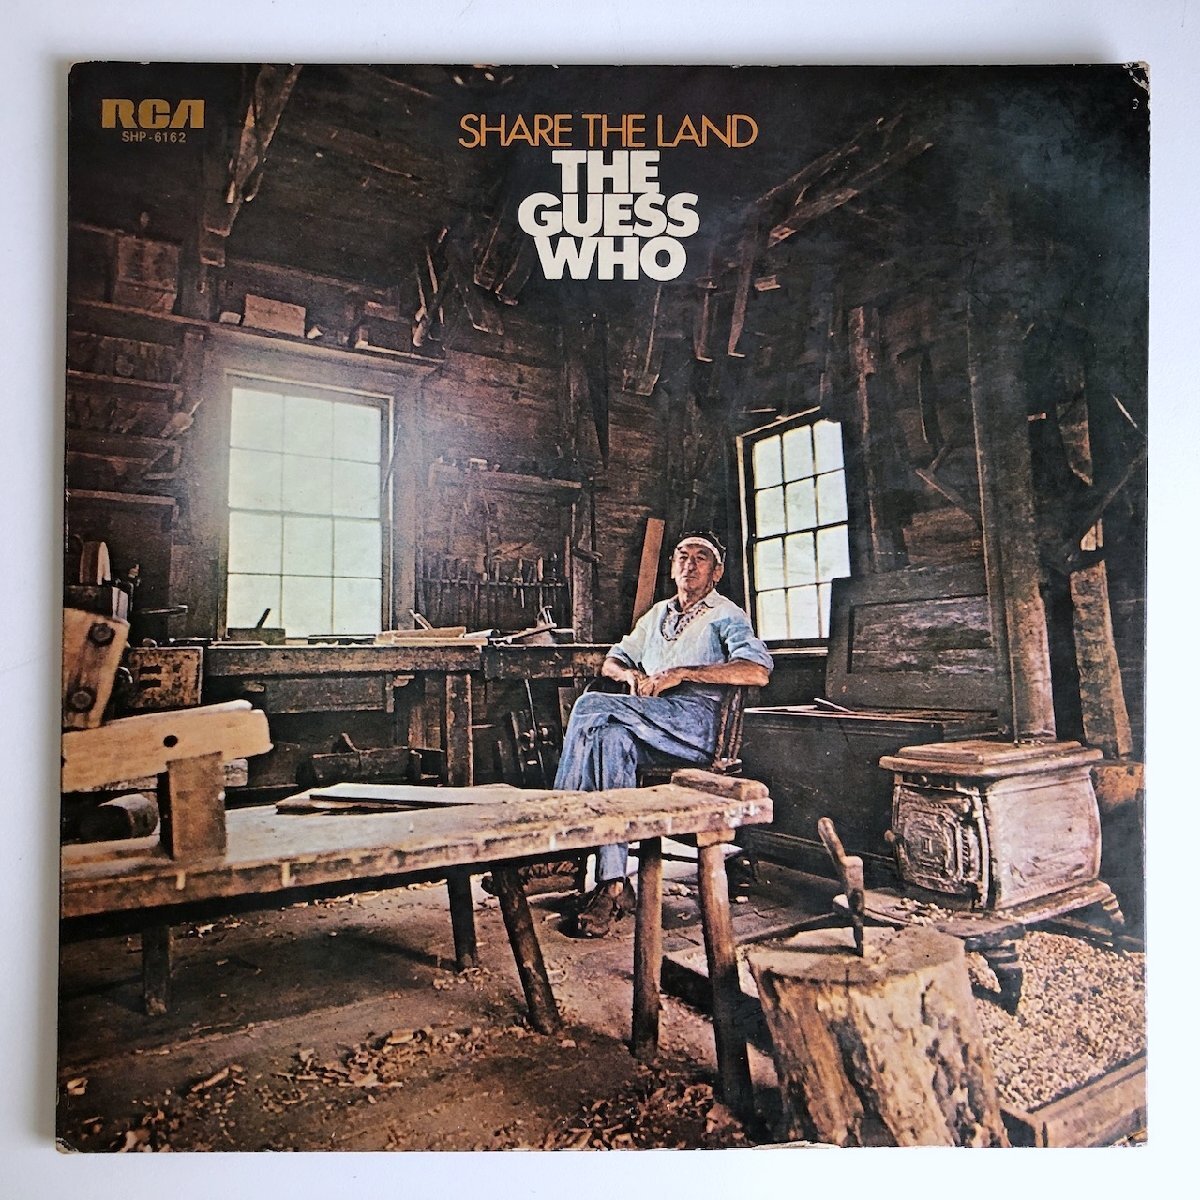 LP/ THE GUESS WHO / SHARE THE LAND / ゲス・フー / 国内盤 見本盤 RCA SHP-6162 40326_画像1